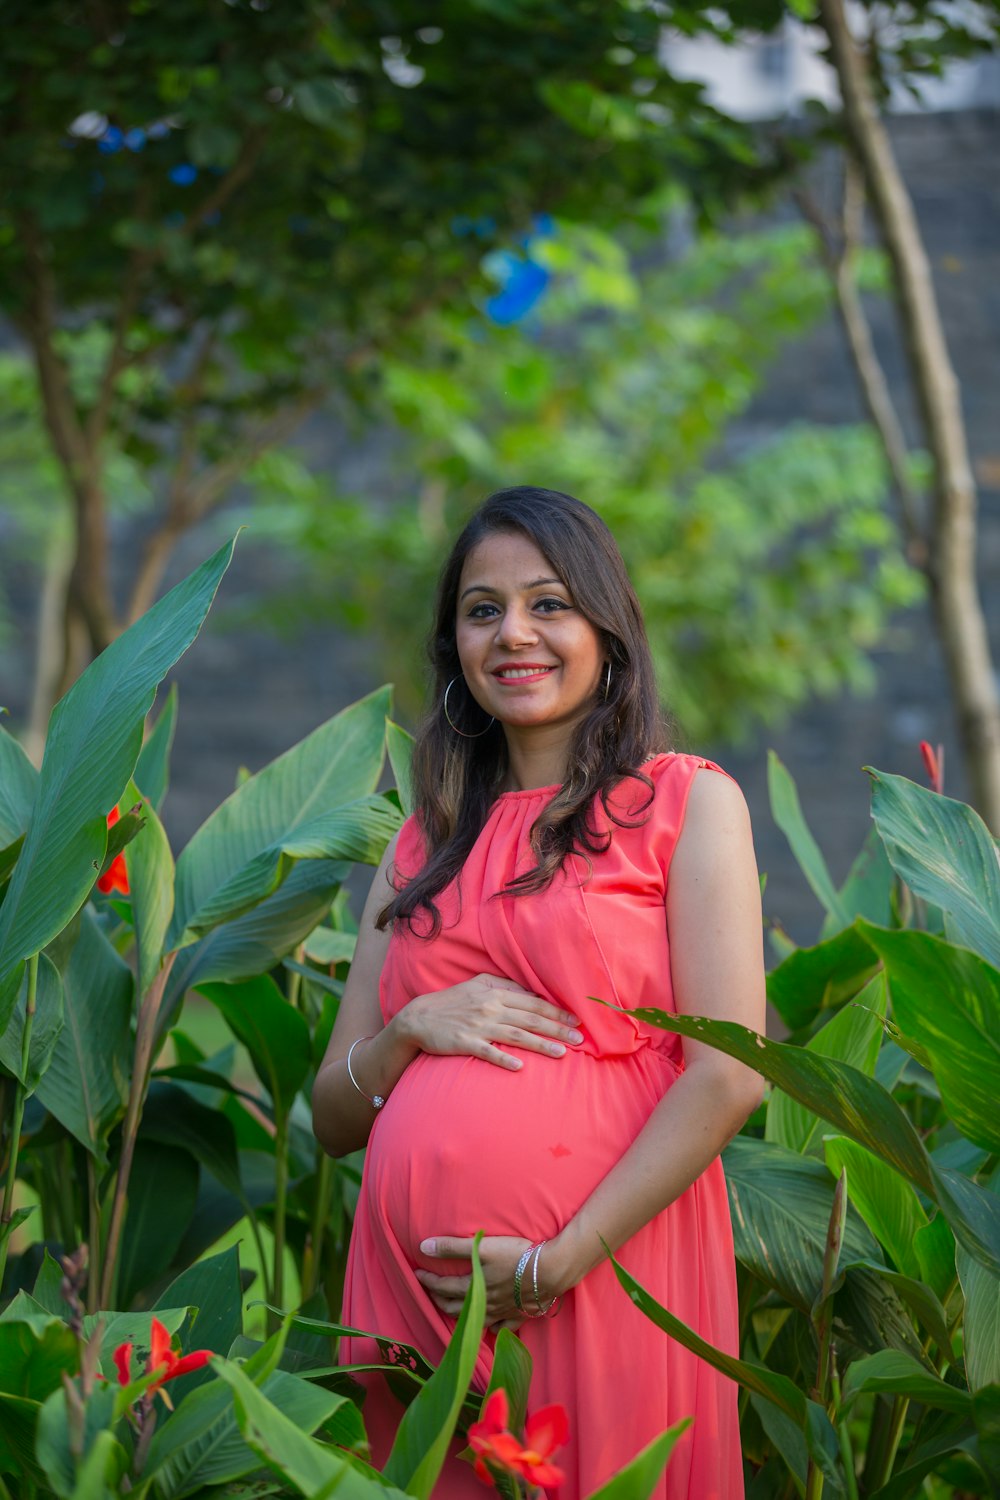 a pregnant woman in a pink dress standing in a garden